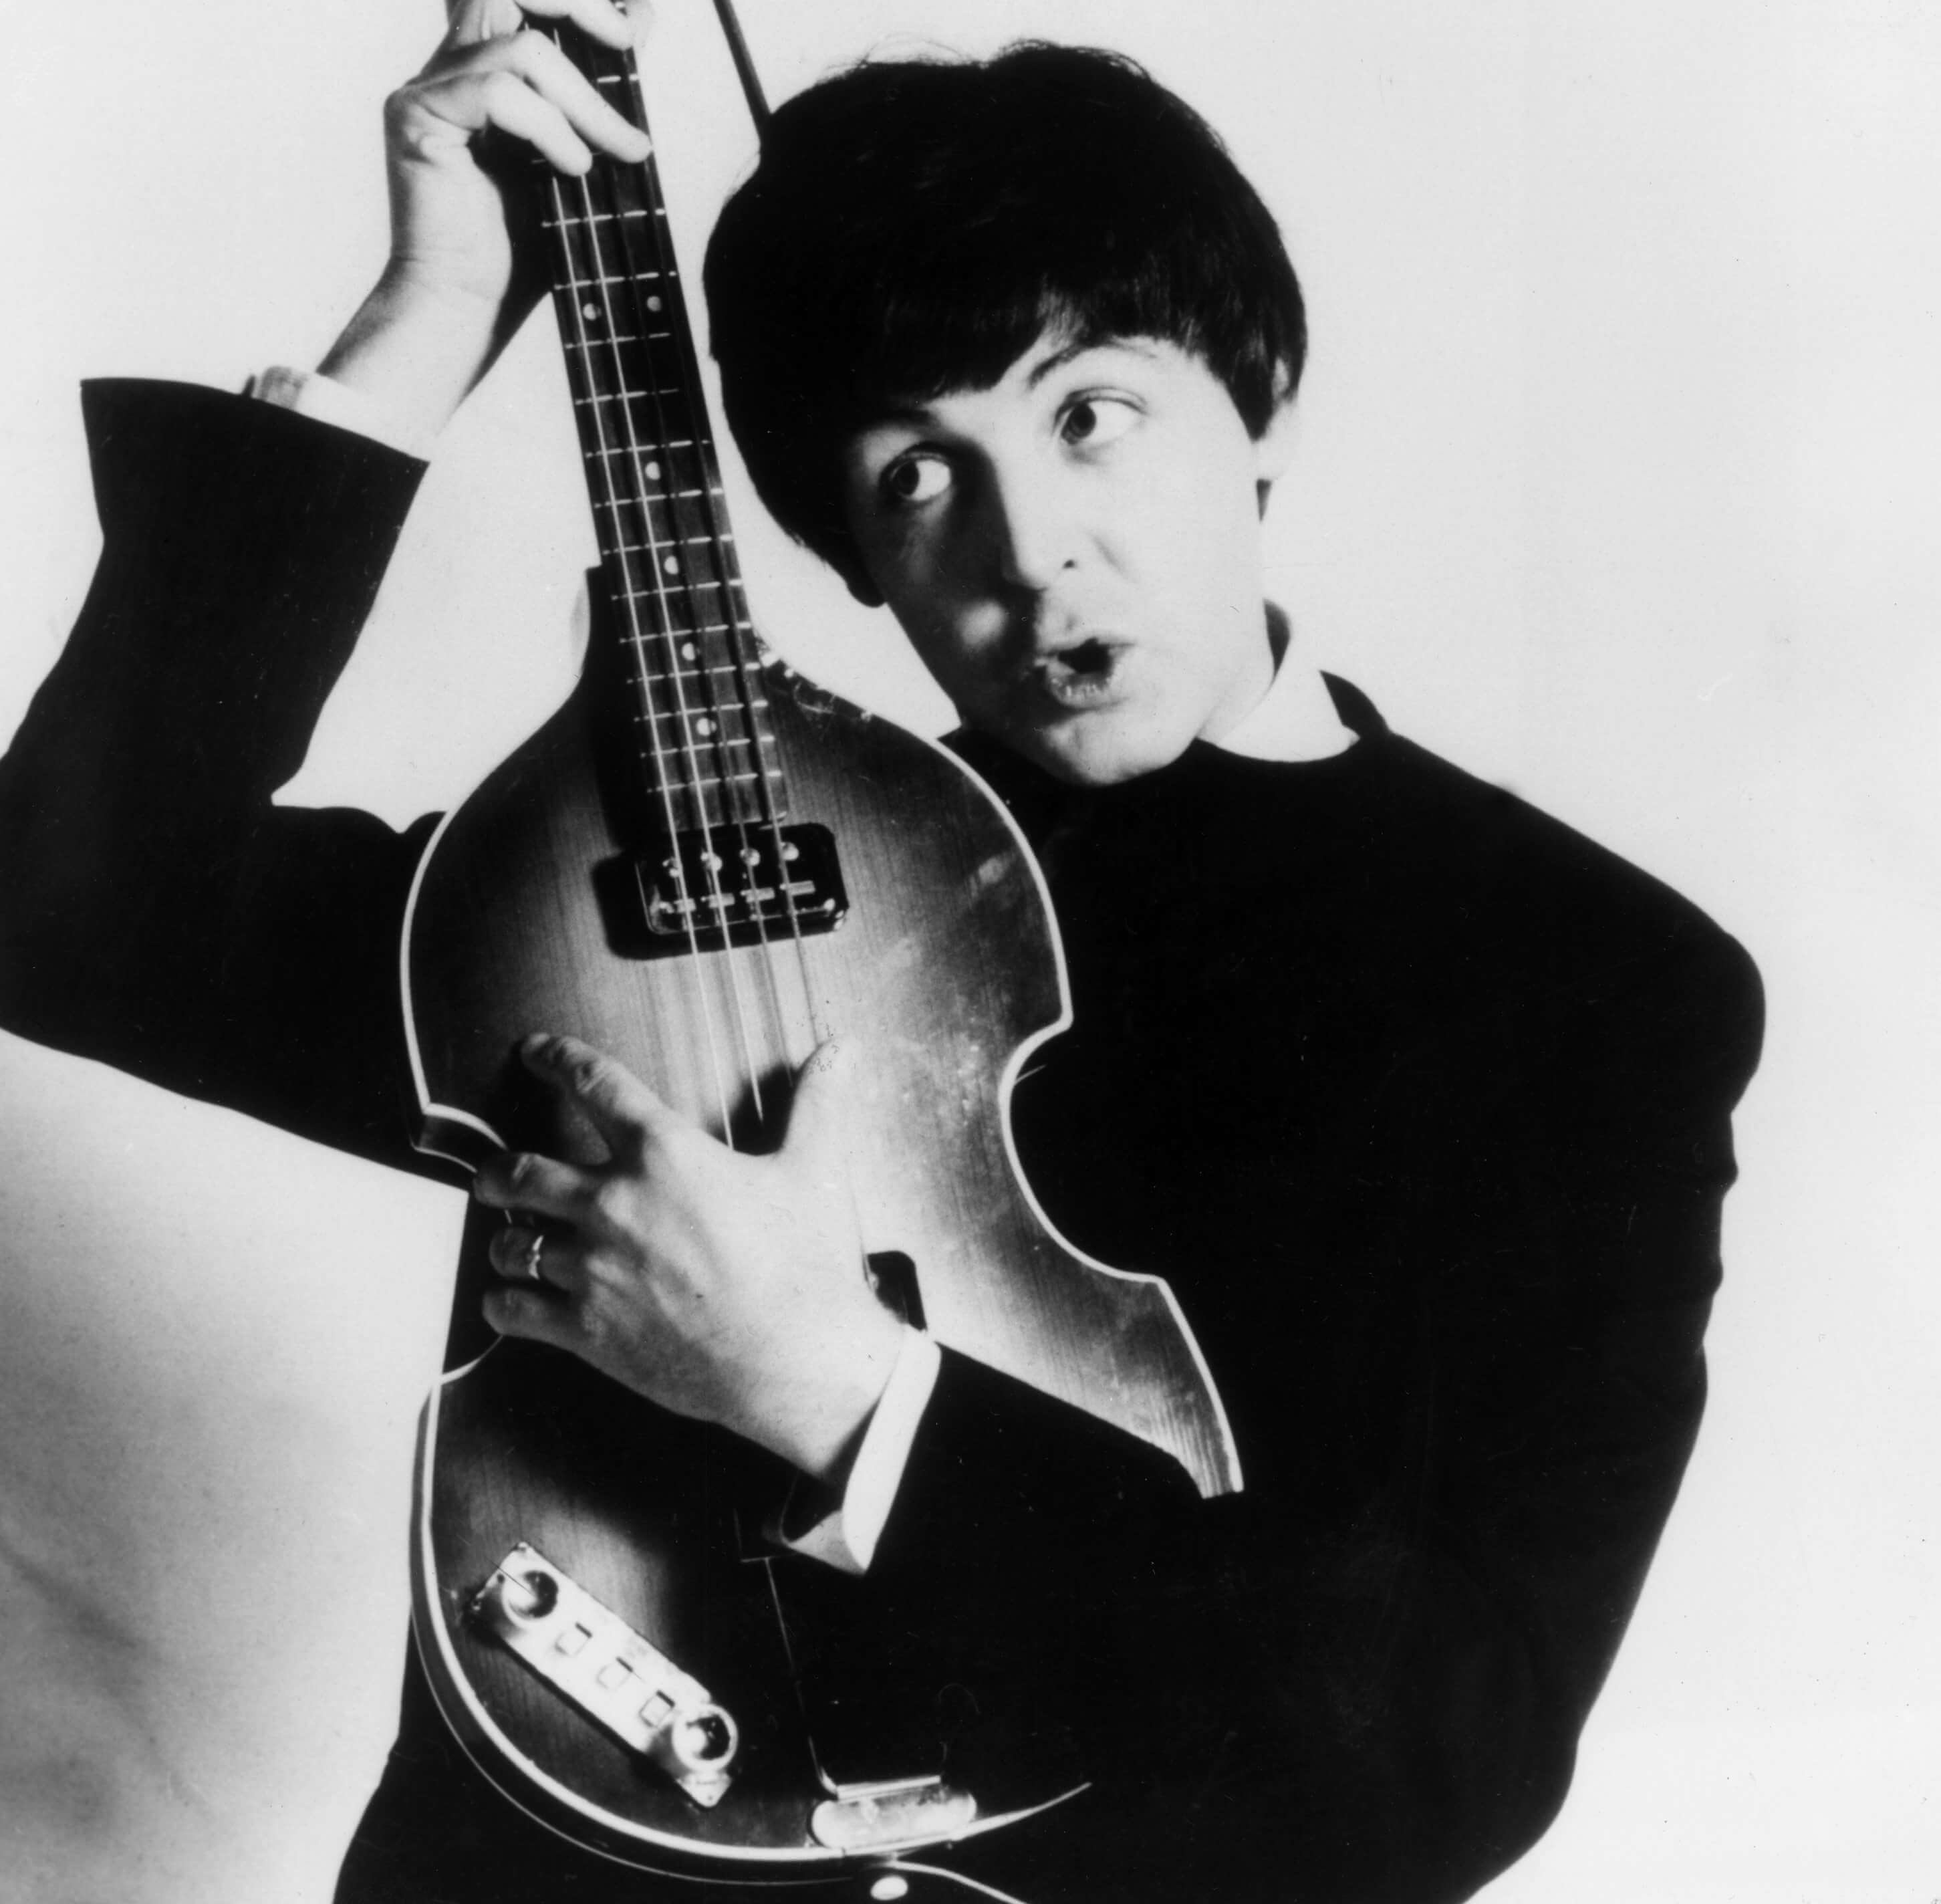 1 Paul McCartney Song Sold 100,000 Copies a Day